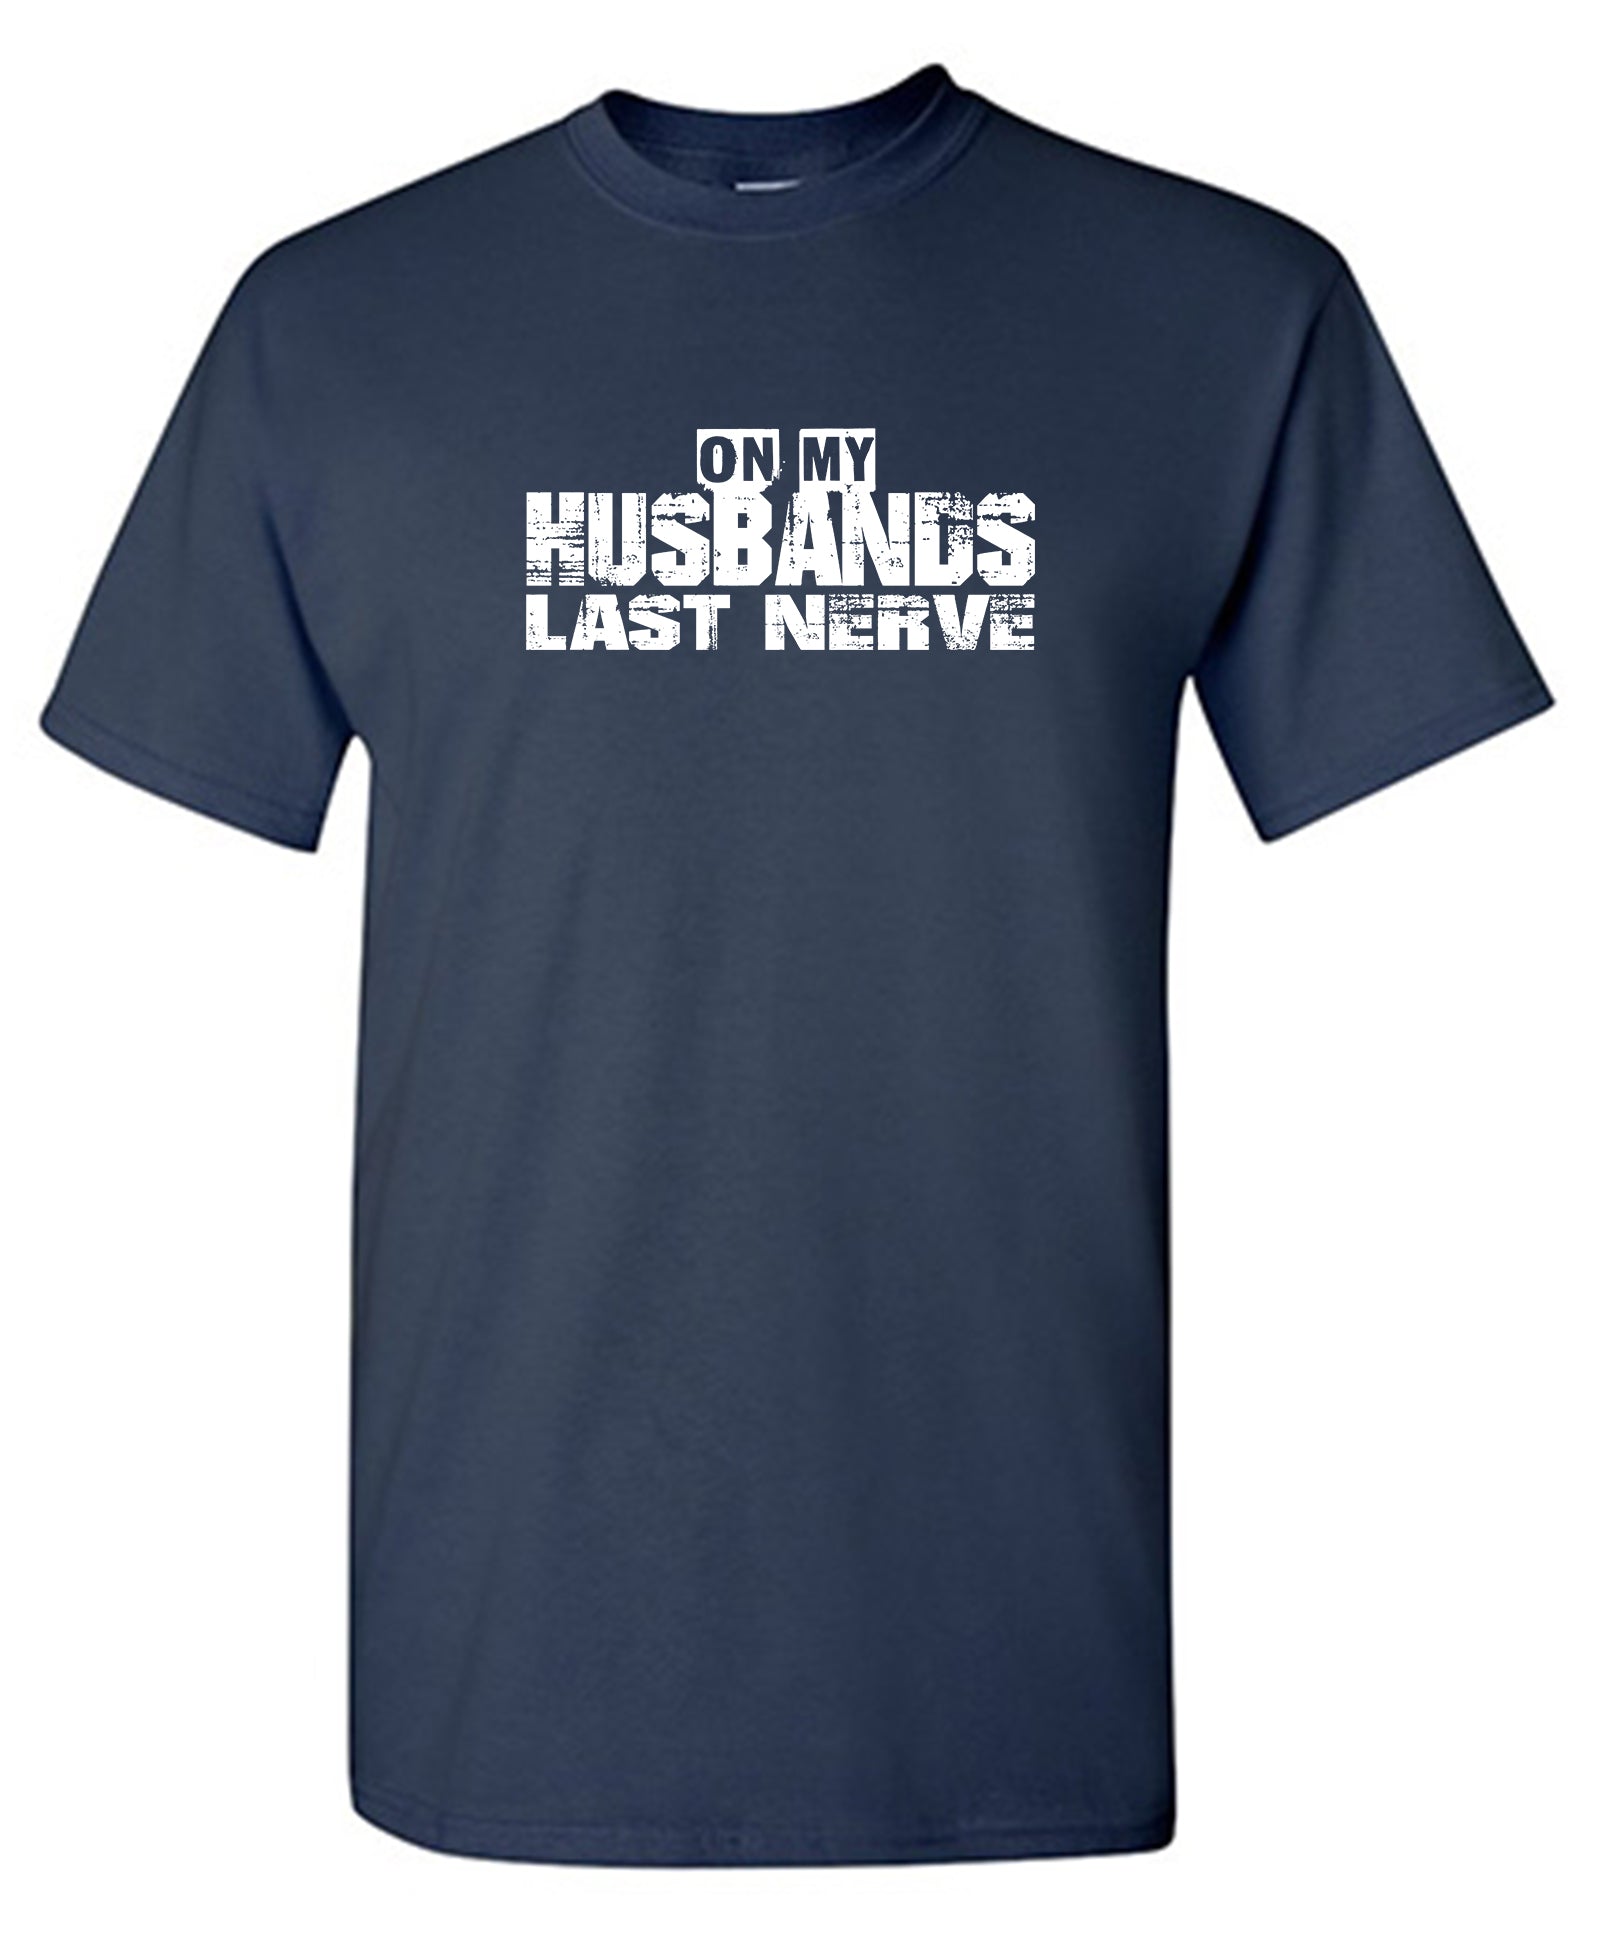 On my Husband's Last Nerve - Funny T Shirts & Graphic Tees